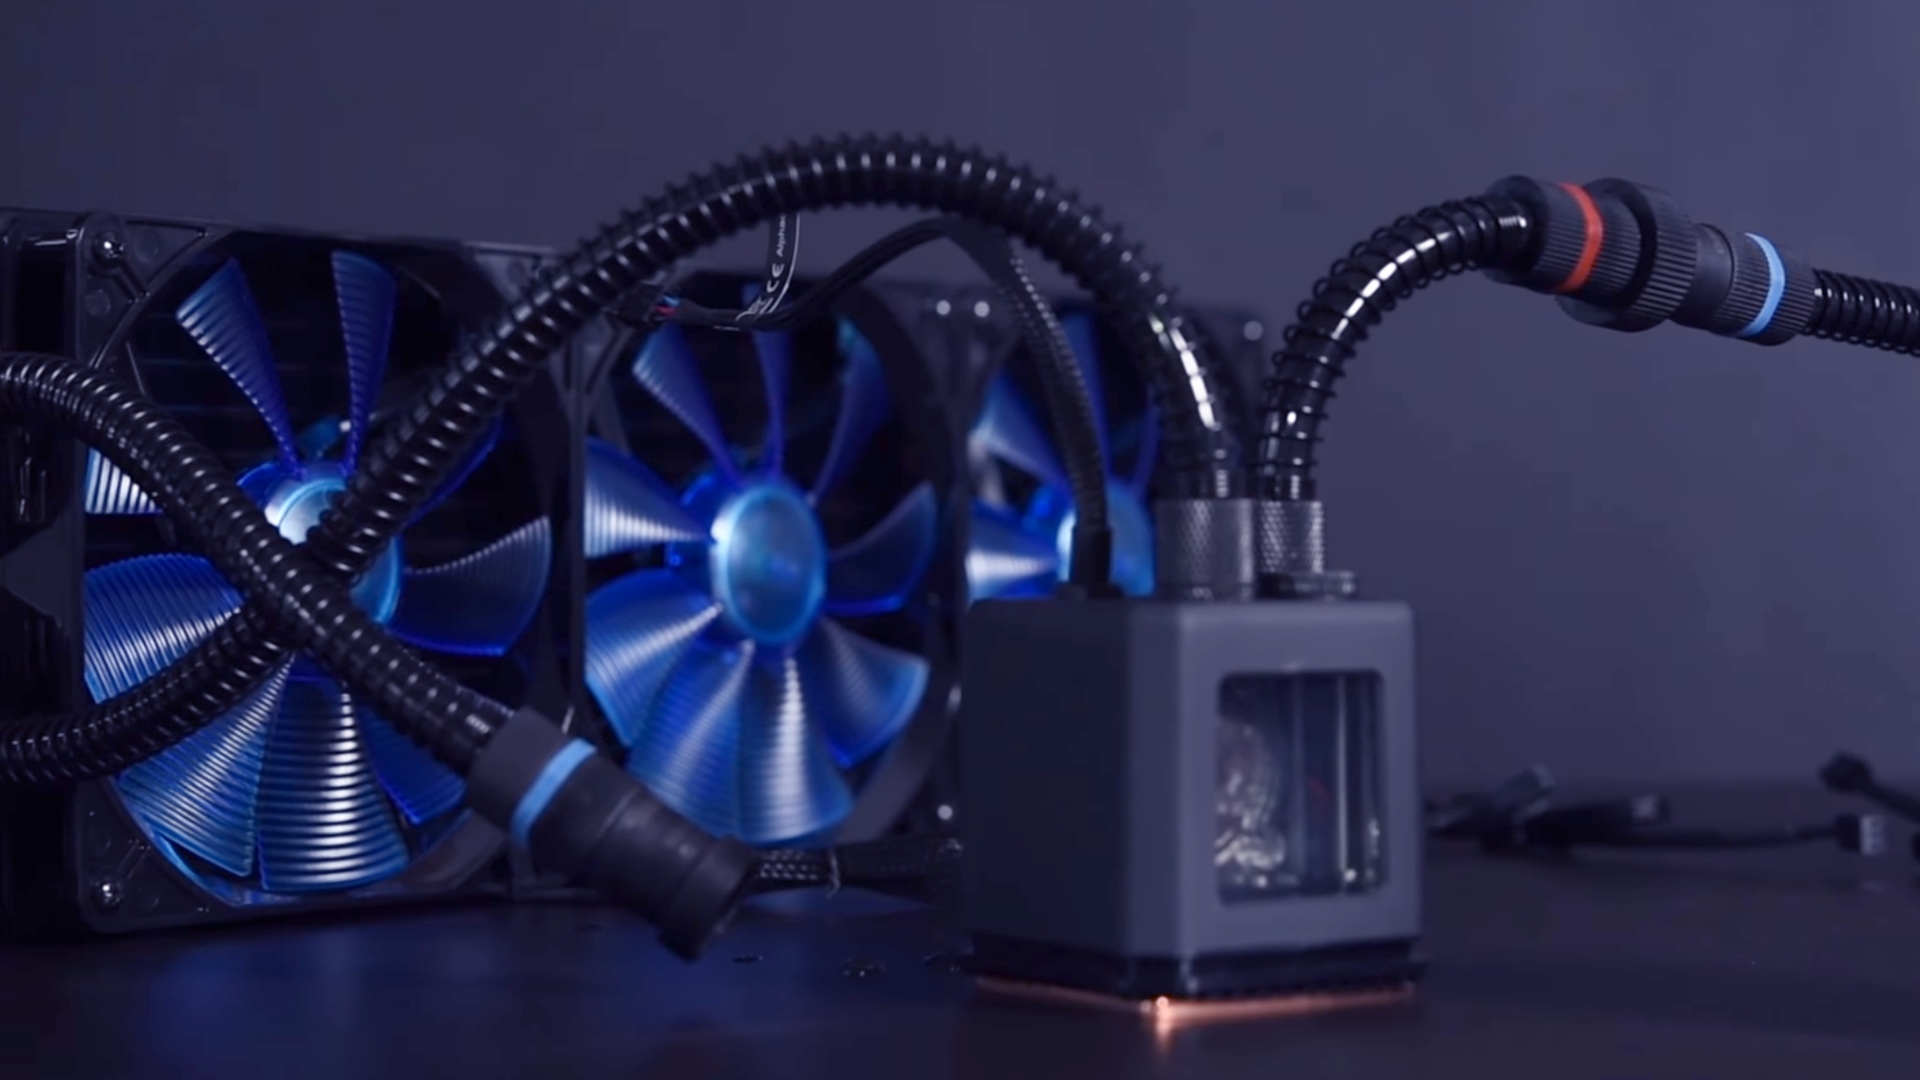 The Best Aio Cooler The Top Liquid Coolers For Your Cpu In 2021 Pcgamesn